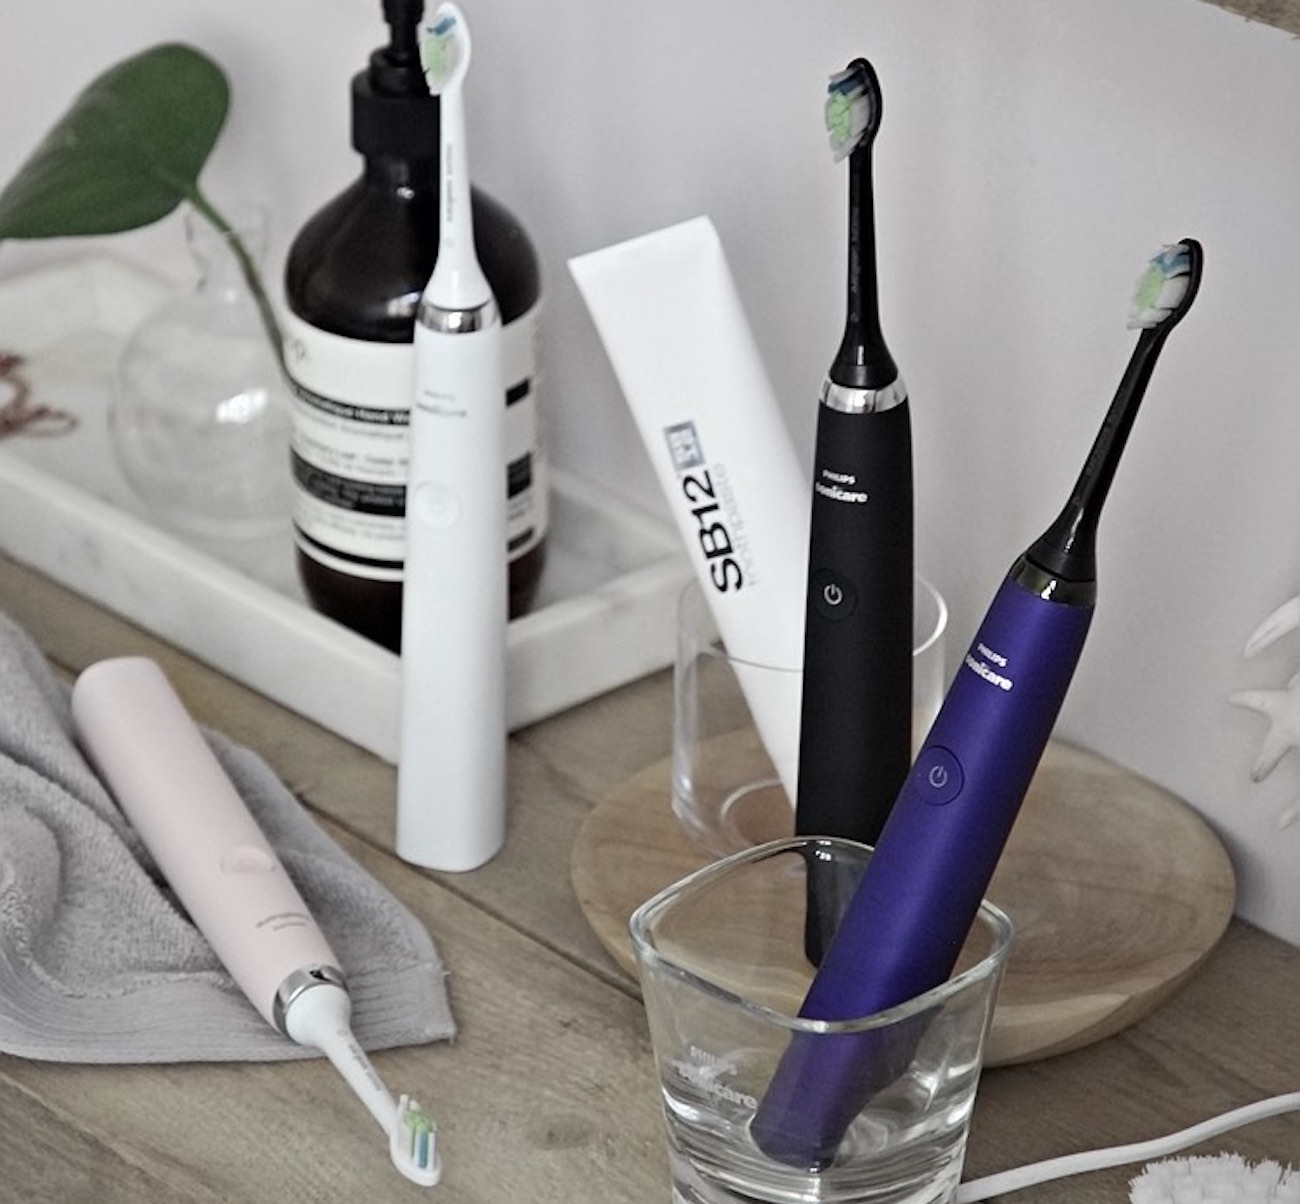 sonicare-diamondclean-electric-toothbrush-by-philips-gadget-flow